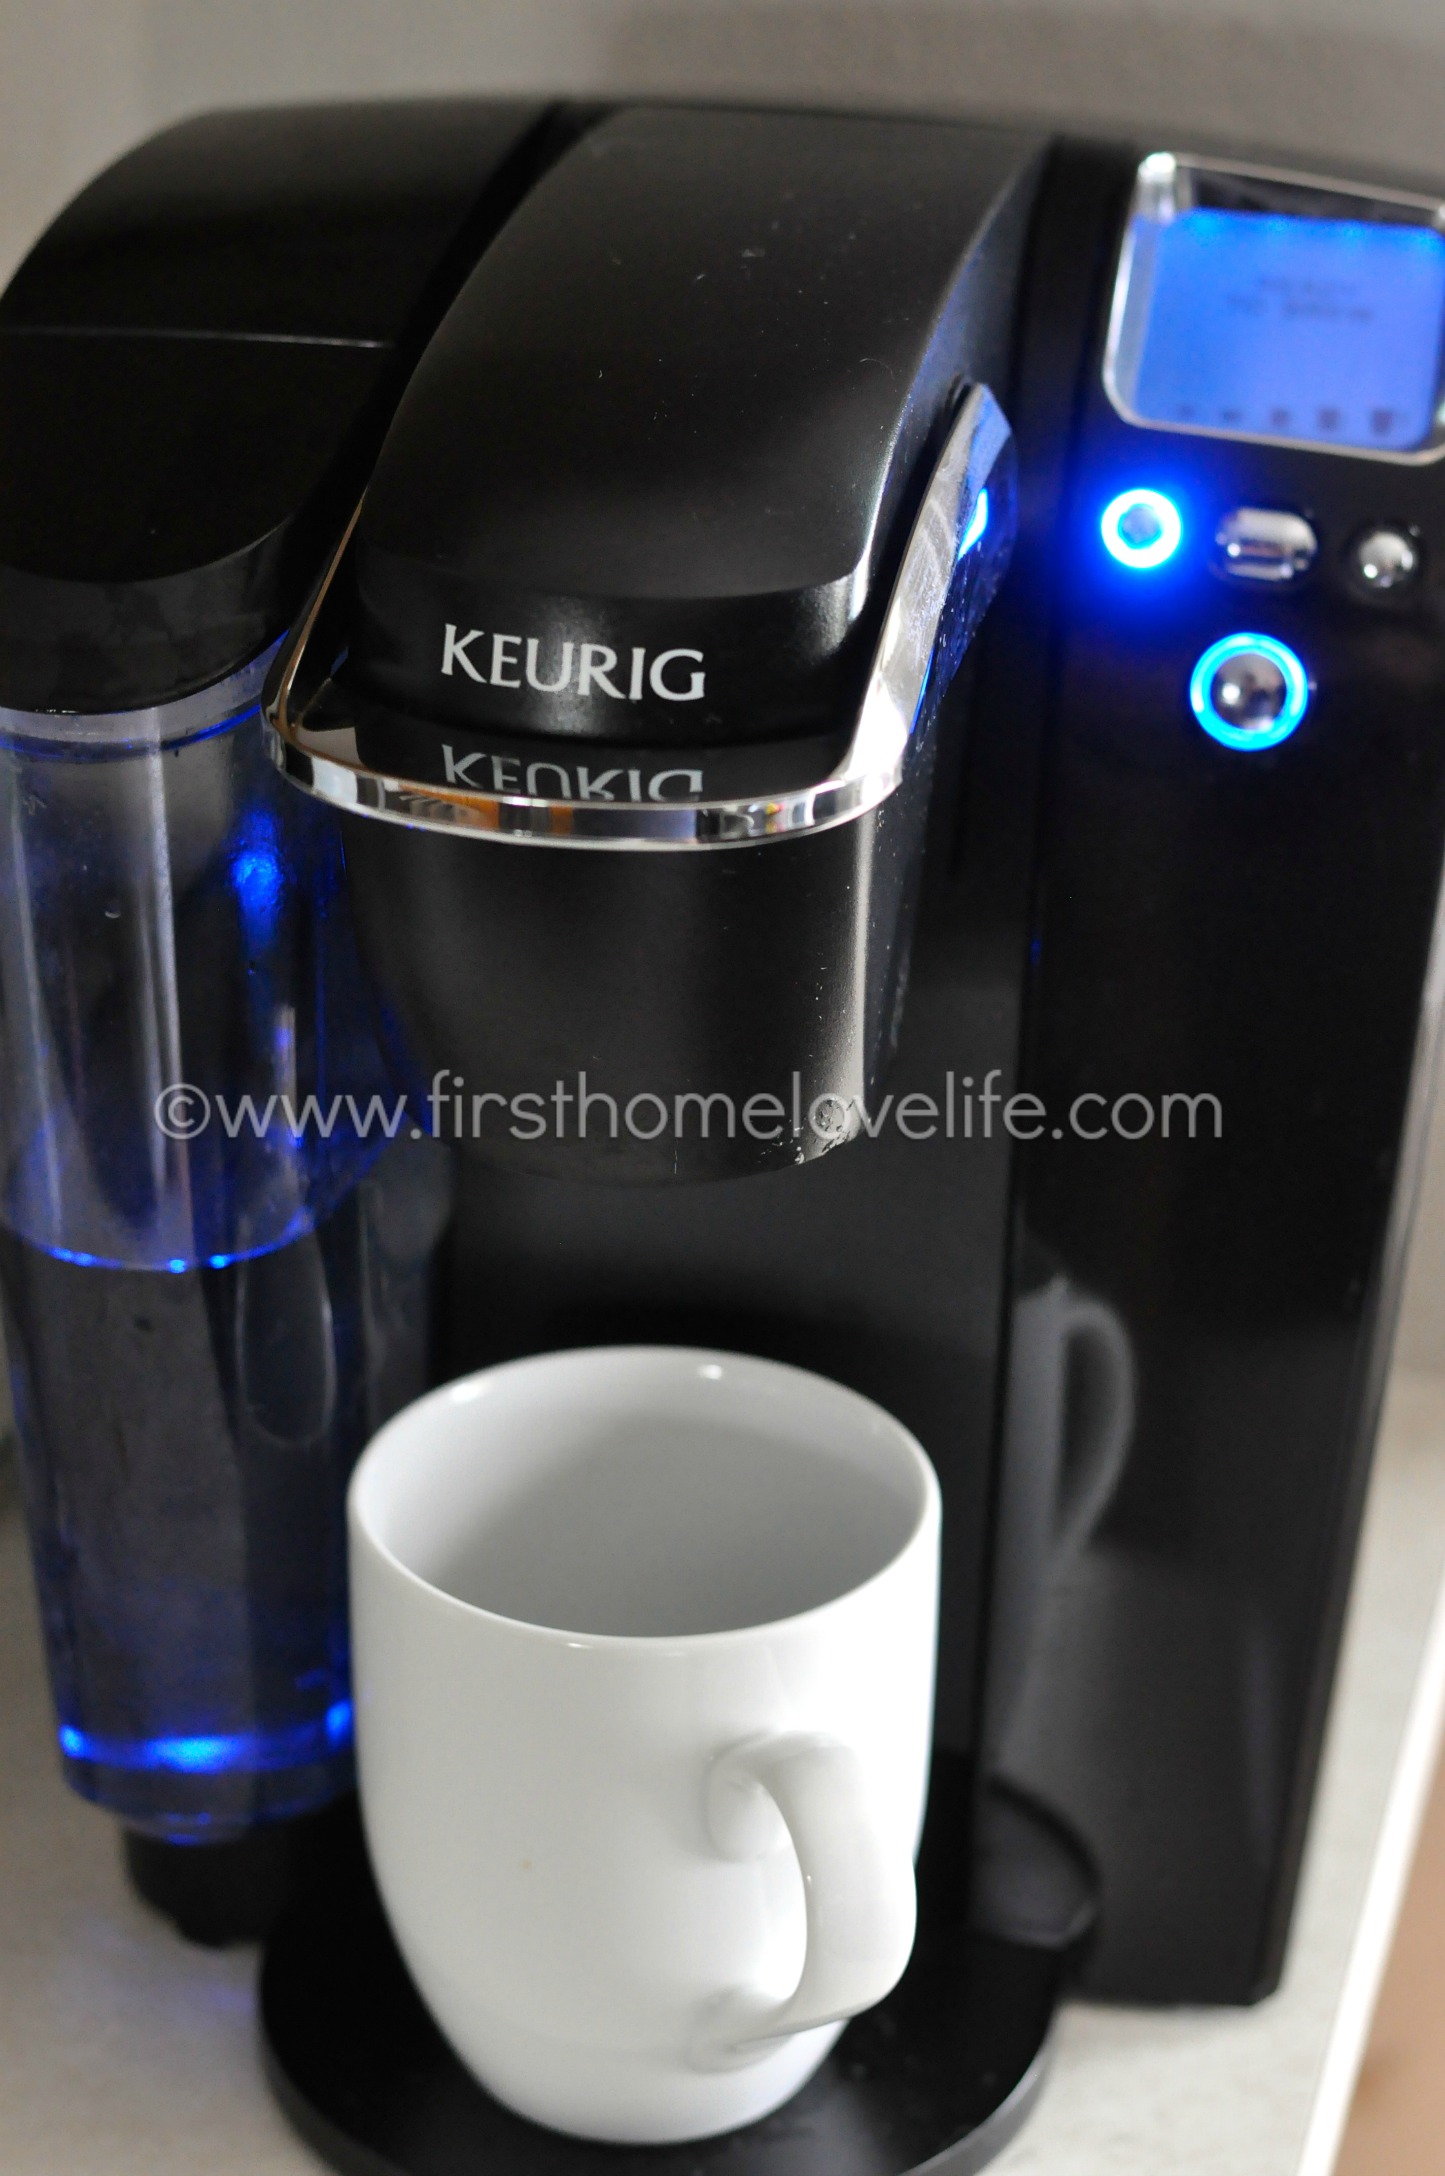 How much vinegar should i use to clean my keurig How To Clean A Keurig Machine